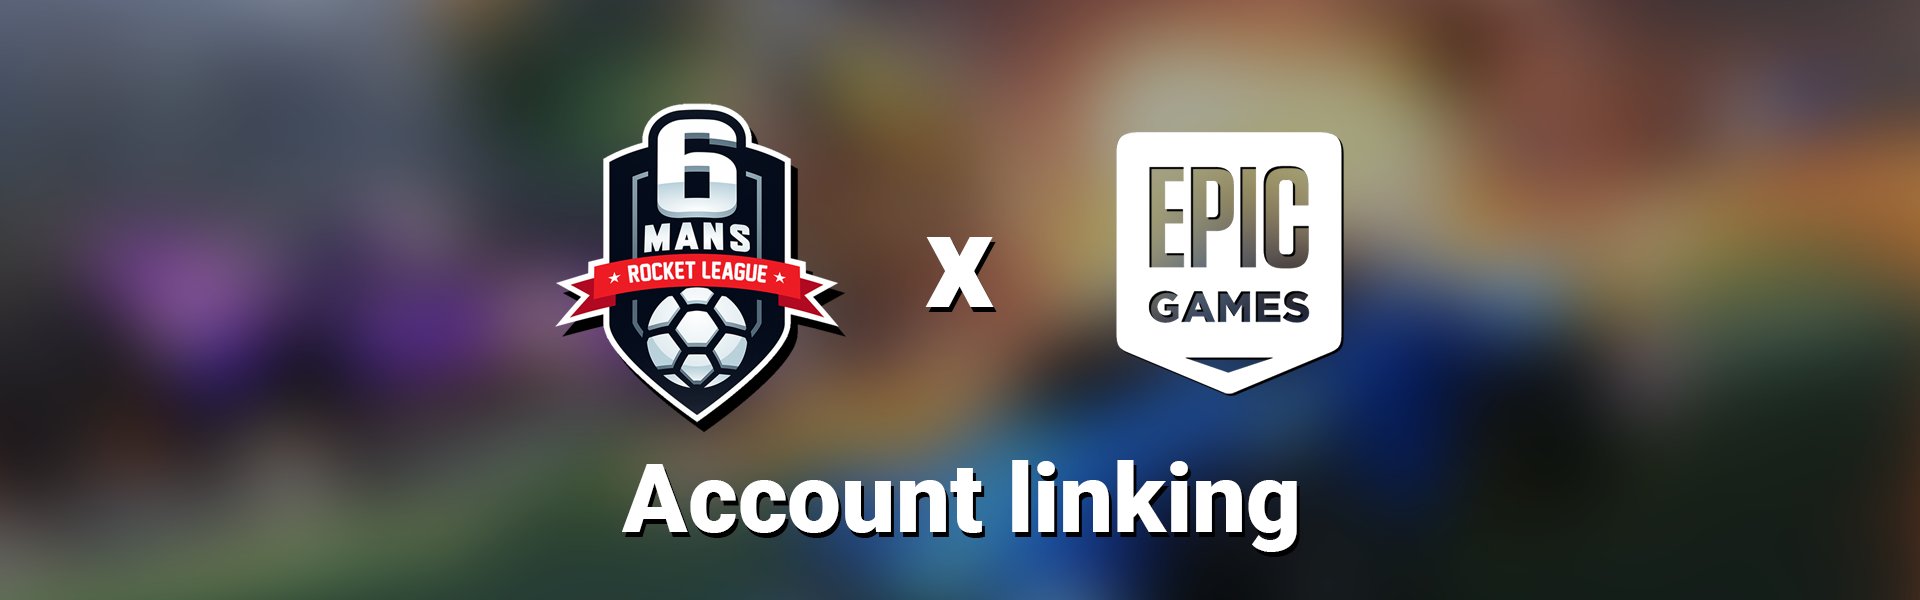 Rocket League 6 Mans We Are Glad To Announce That We Now Support Epic Games Accounts Linking If You Want To Link Your Epic Games Account Please Head Over To